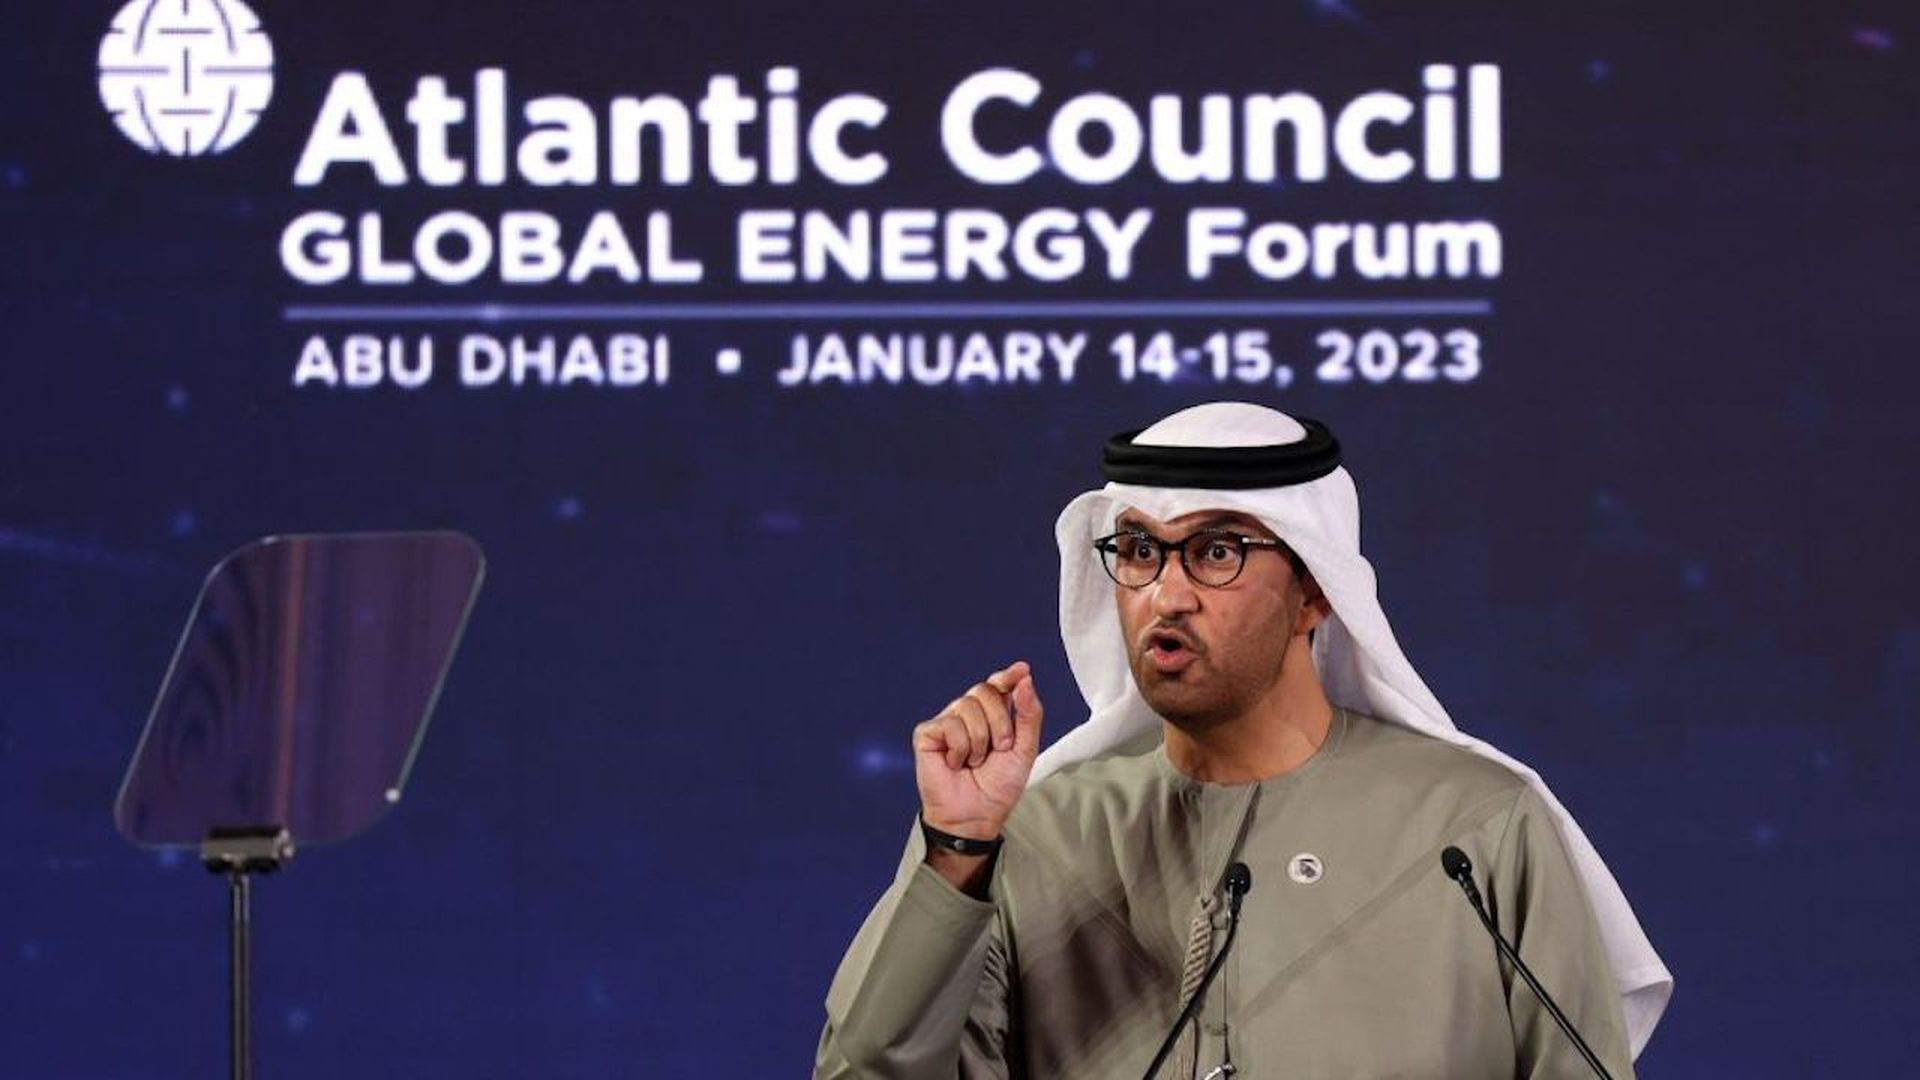 Photo of Sultan Ahmed al-Jaber addressing the public at the opening session of the Atlantic Council Global Energy Forum, in the capital Abu Dhabi, on January 14, 2023.